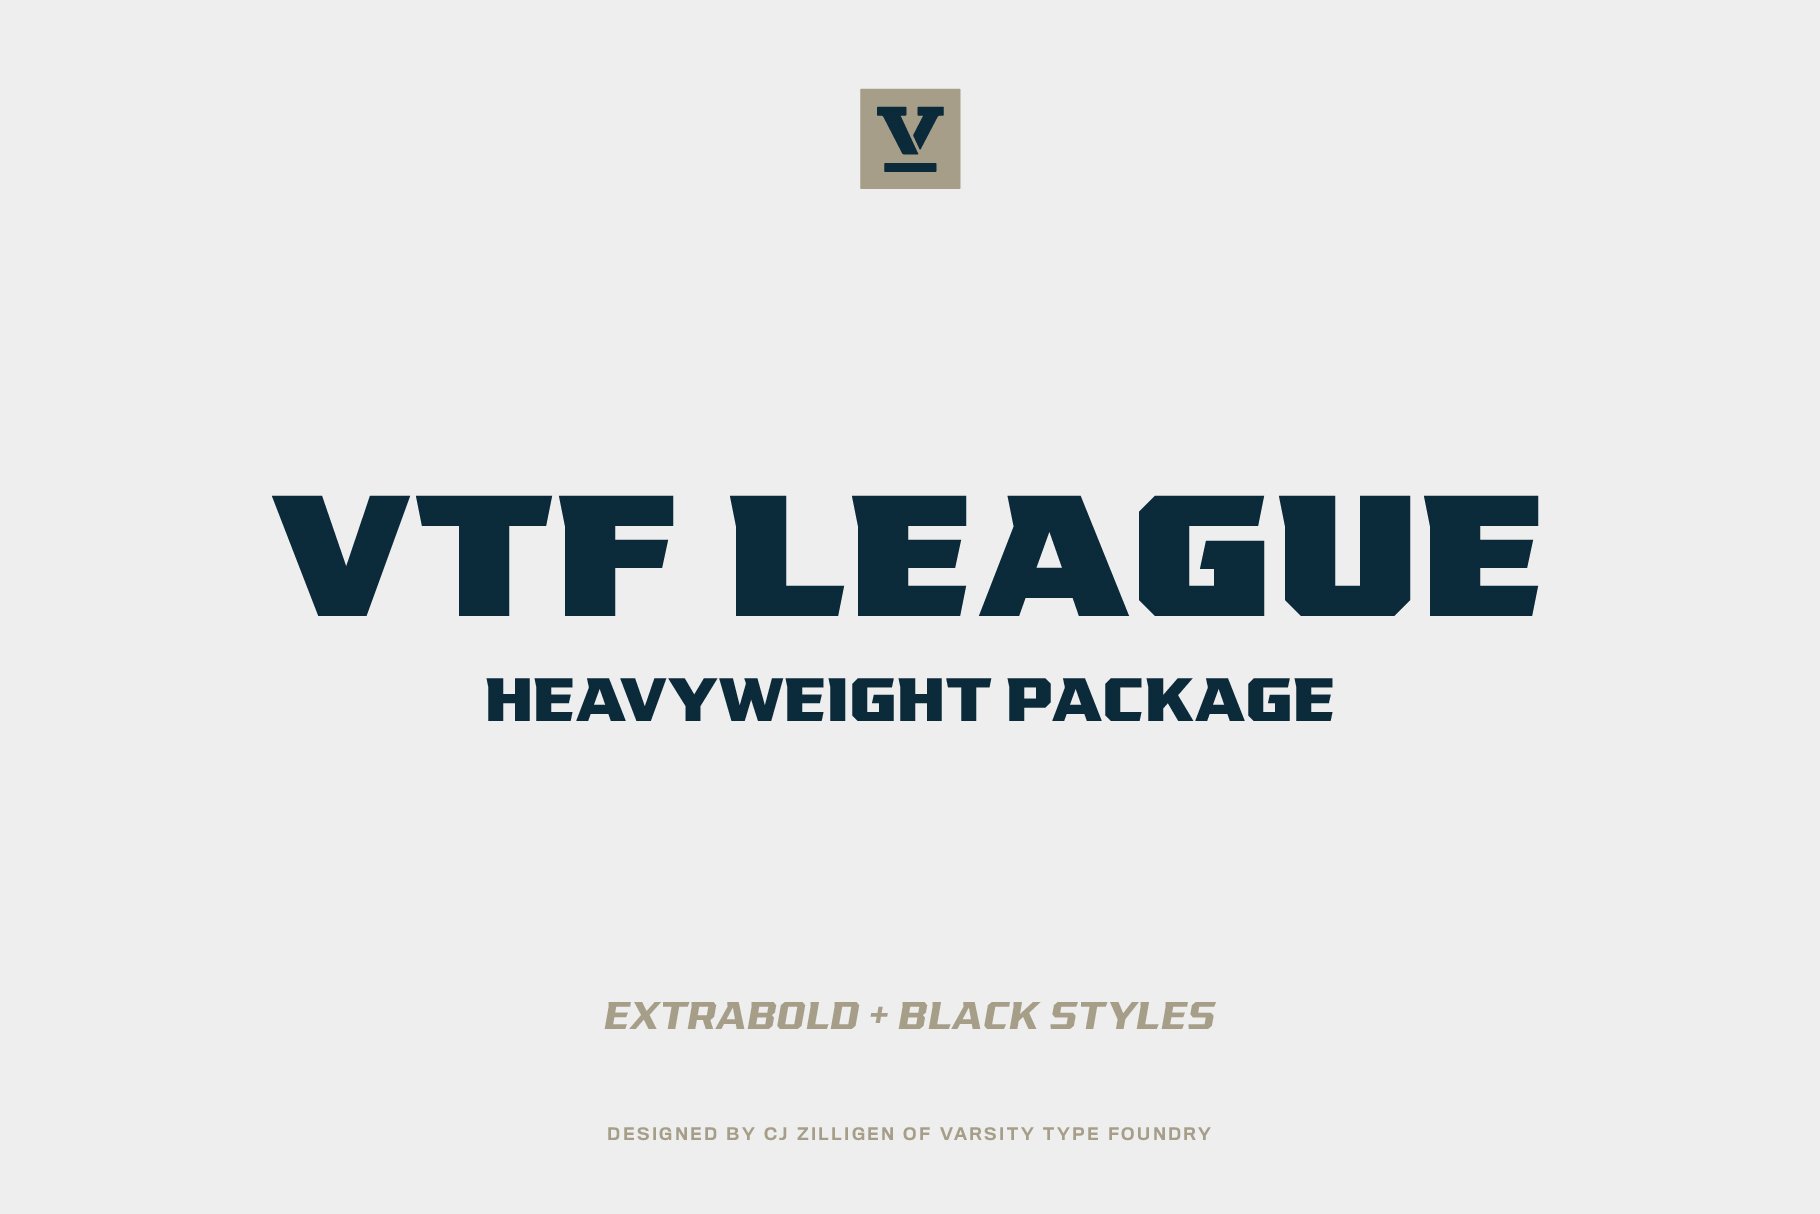 VTF League – Heavyweights cover image.